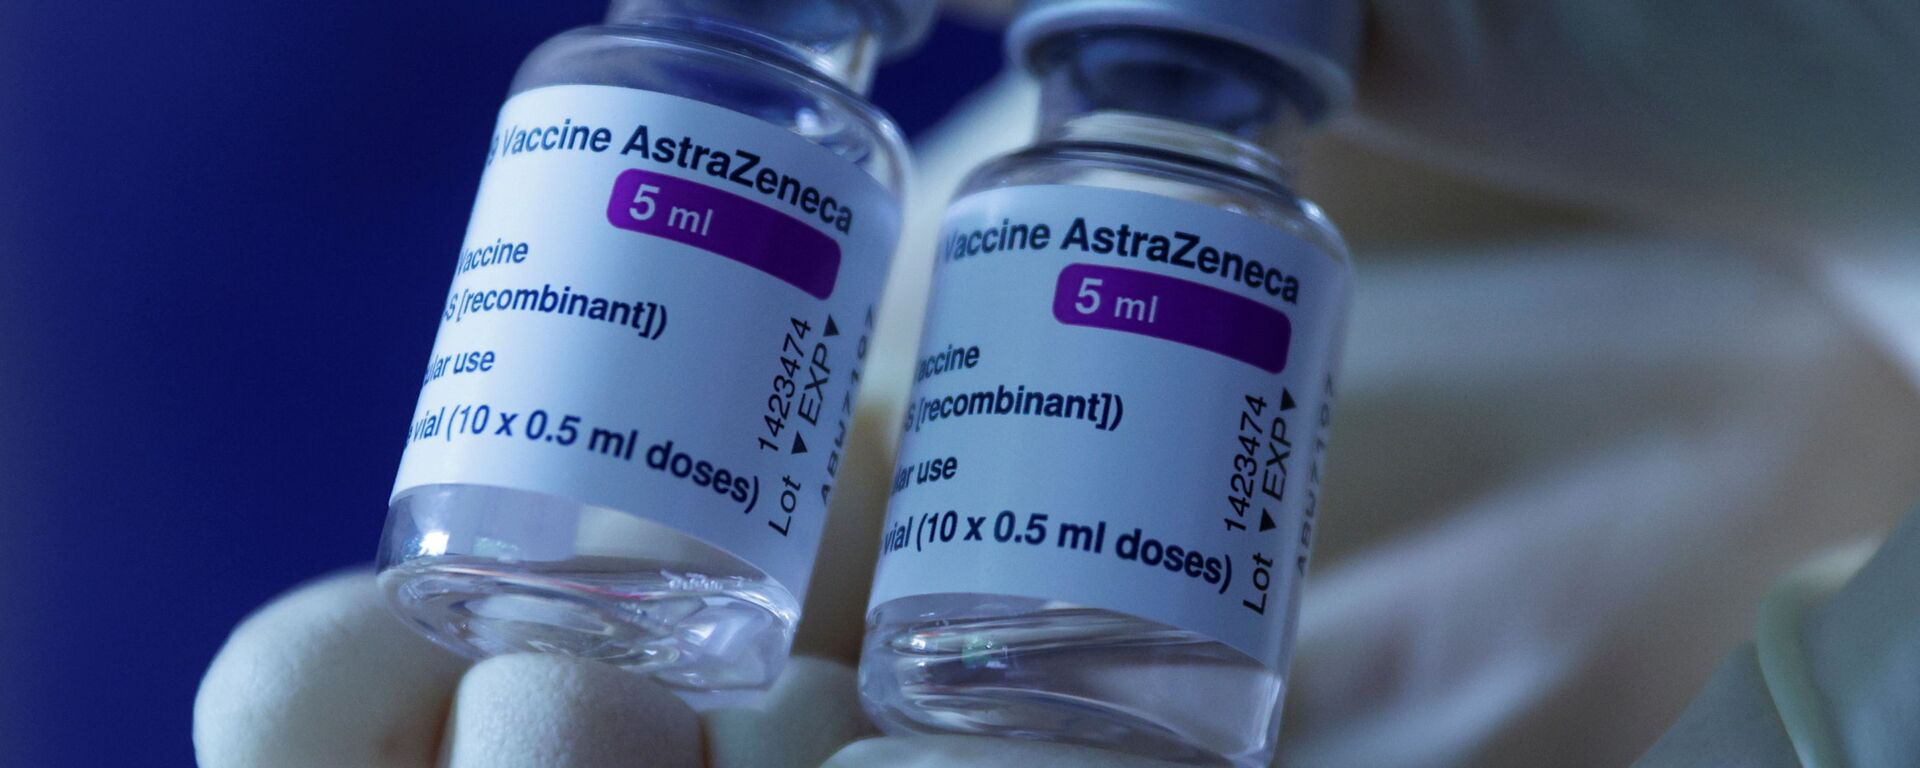 A doctor shows vials of AstraZeneca's COVID-19 vaccine in his general practice facility, as the spread of the coronavirus disease (COVID-19) continues, in Vienna, Austria May13, 2021.  REUTERS/Leonhard Foeger - Sputnik International, 1920, 26.05.2021